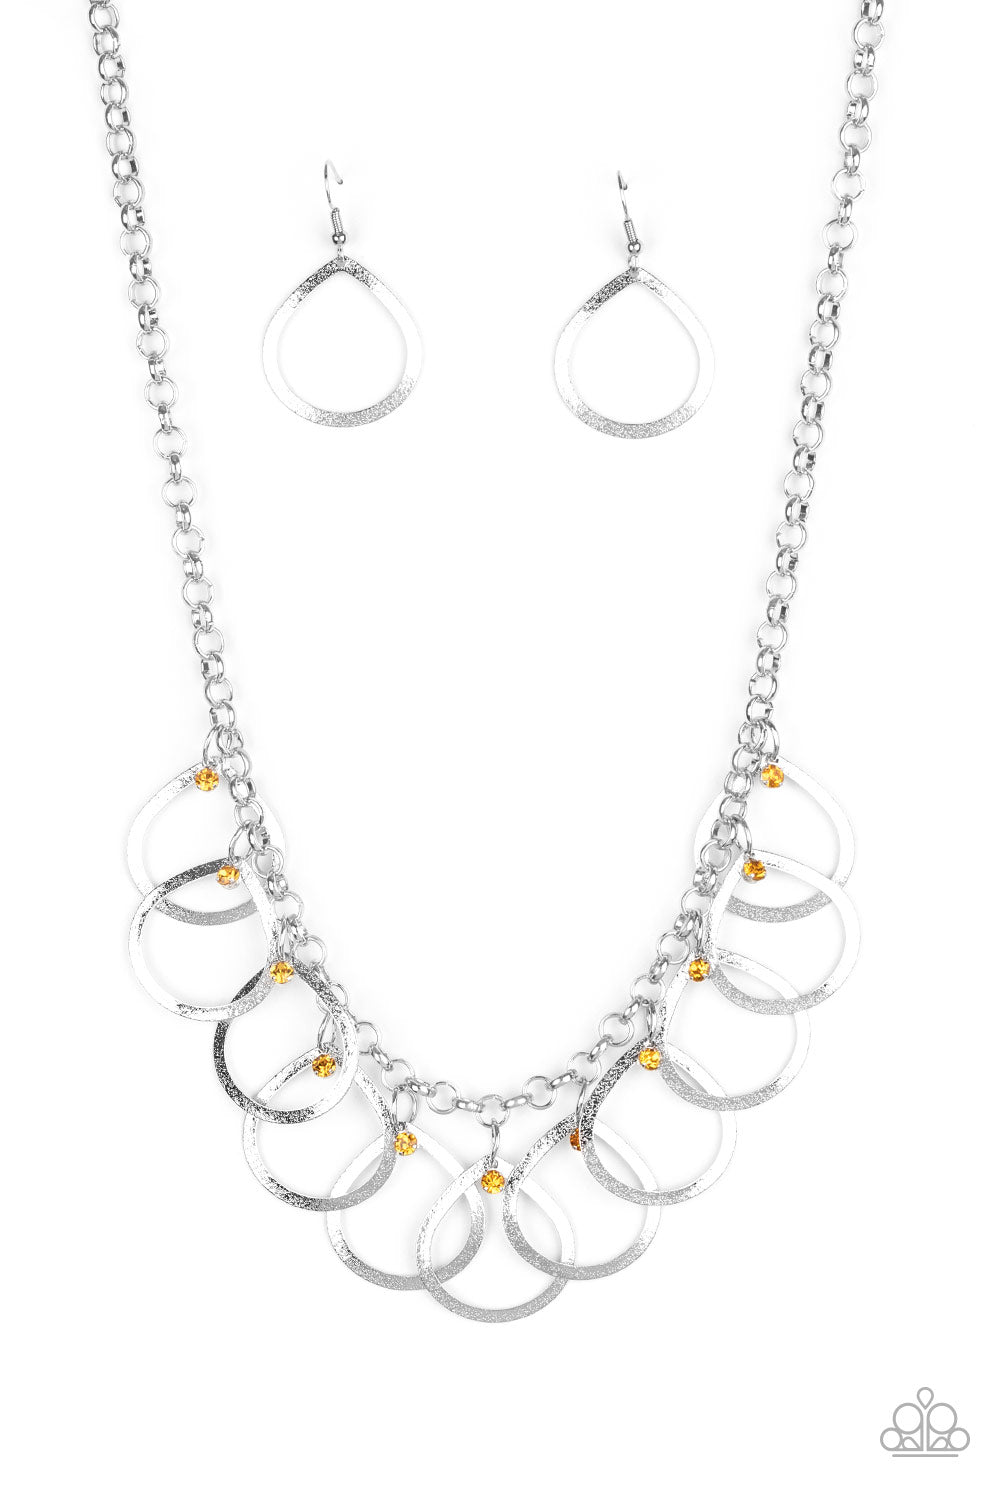 Drop by Drop - yellow - Paparazzi necklace